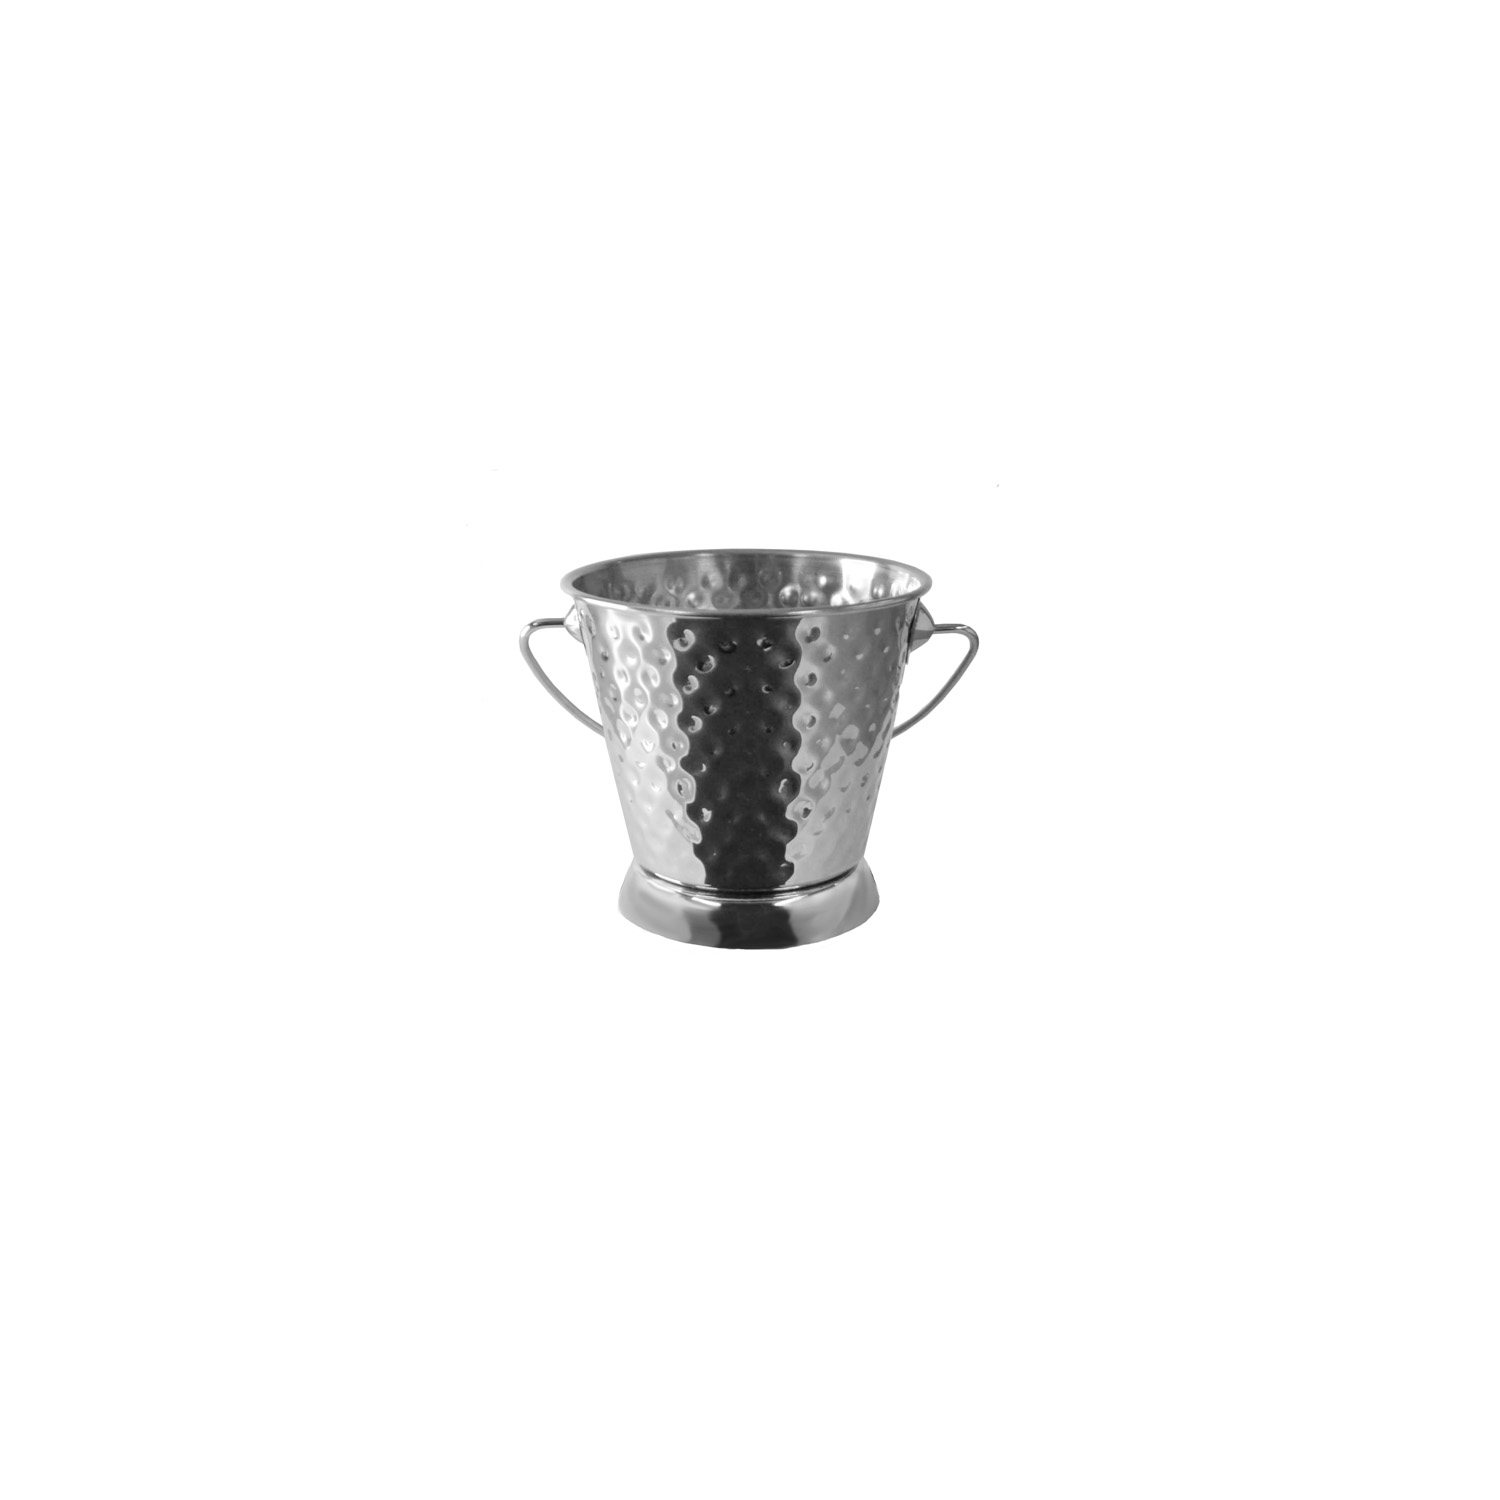 CAC China SMPL-35H Stainless Steel Mini Serving Pail with Hammered Handle 3 1/2" Dia x 3 5/8" H